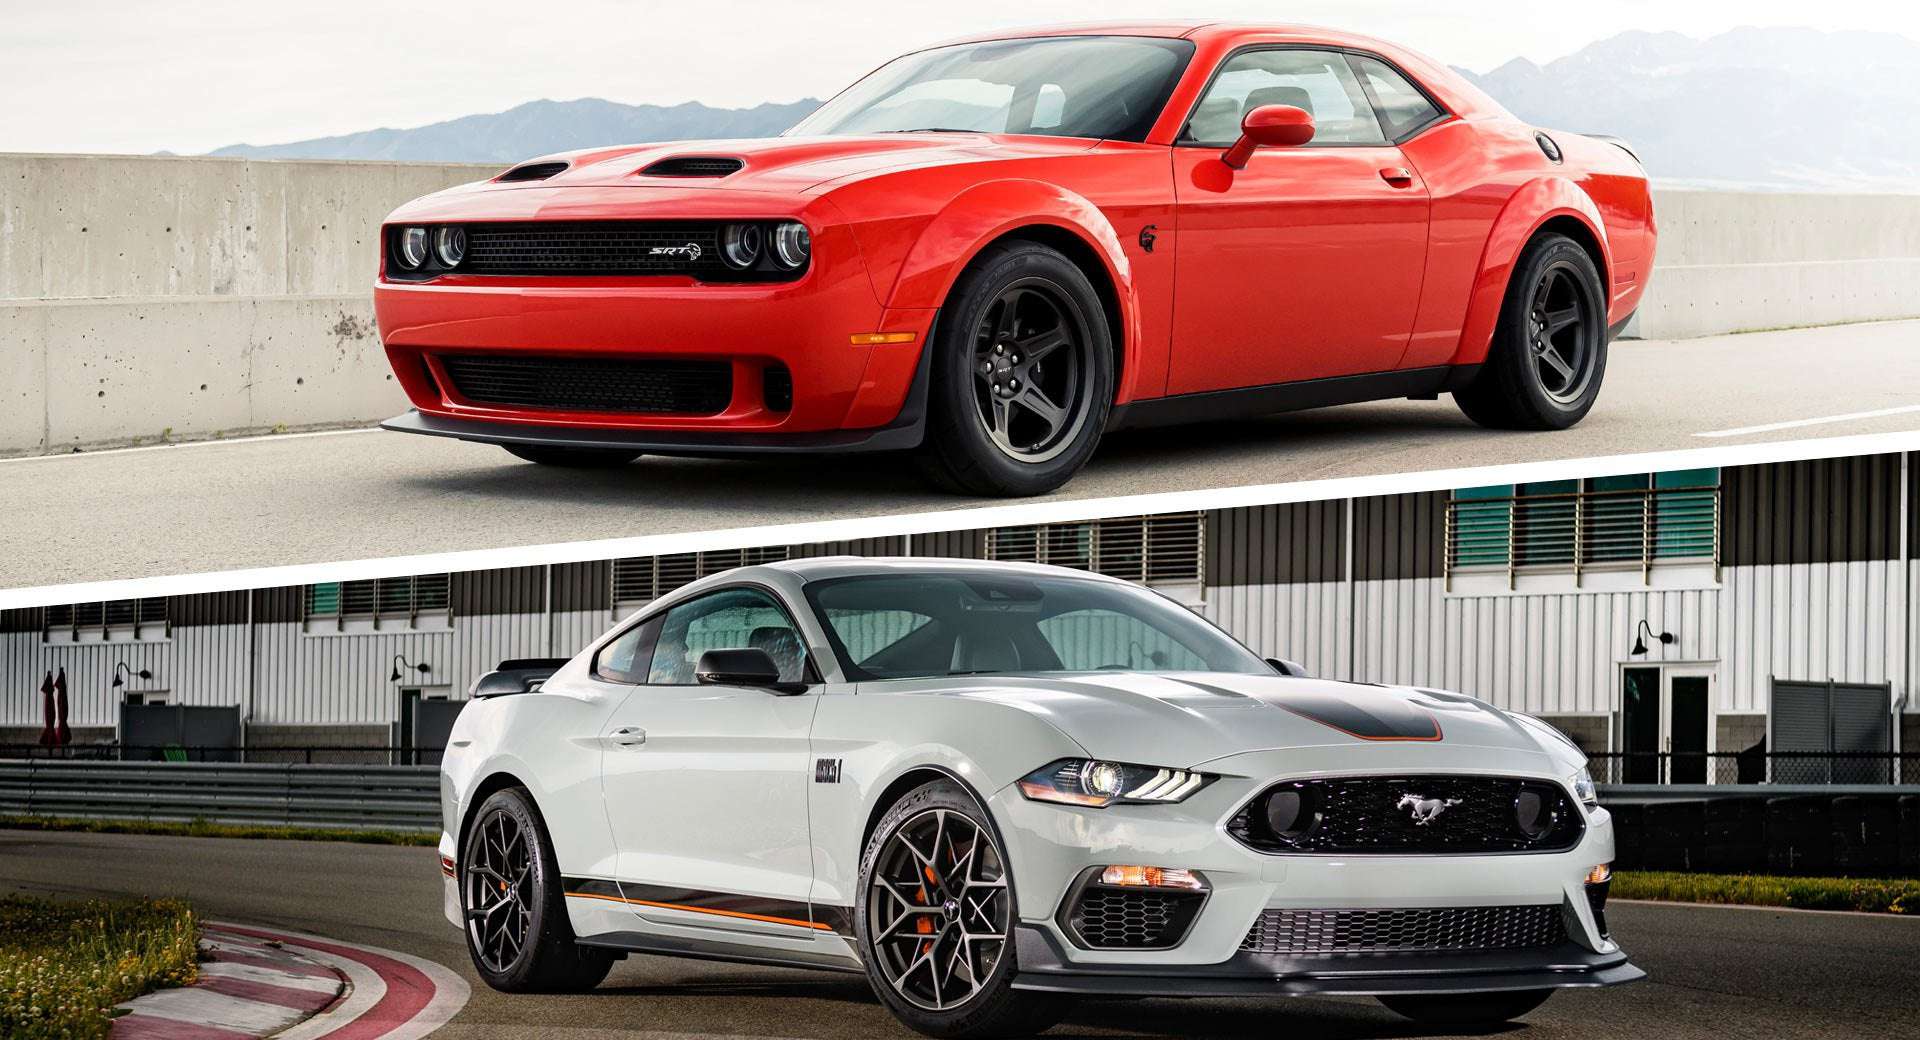 image for Ford Mustang And Dodge Challenger Outsell Chevy Camaro By Over 2:1